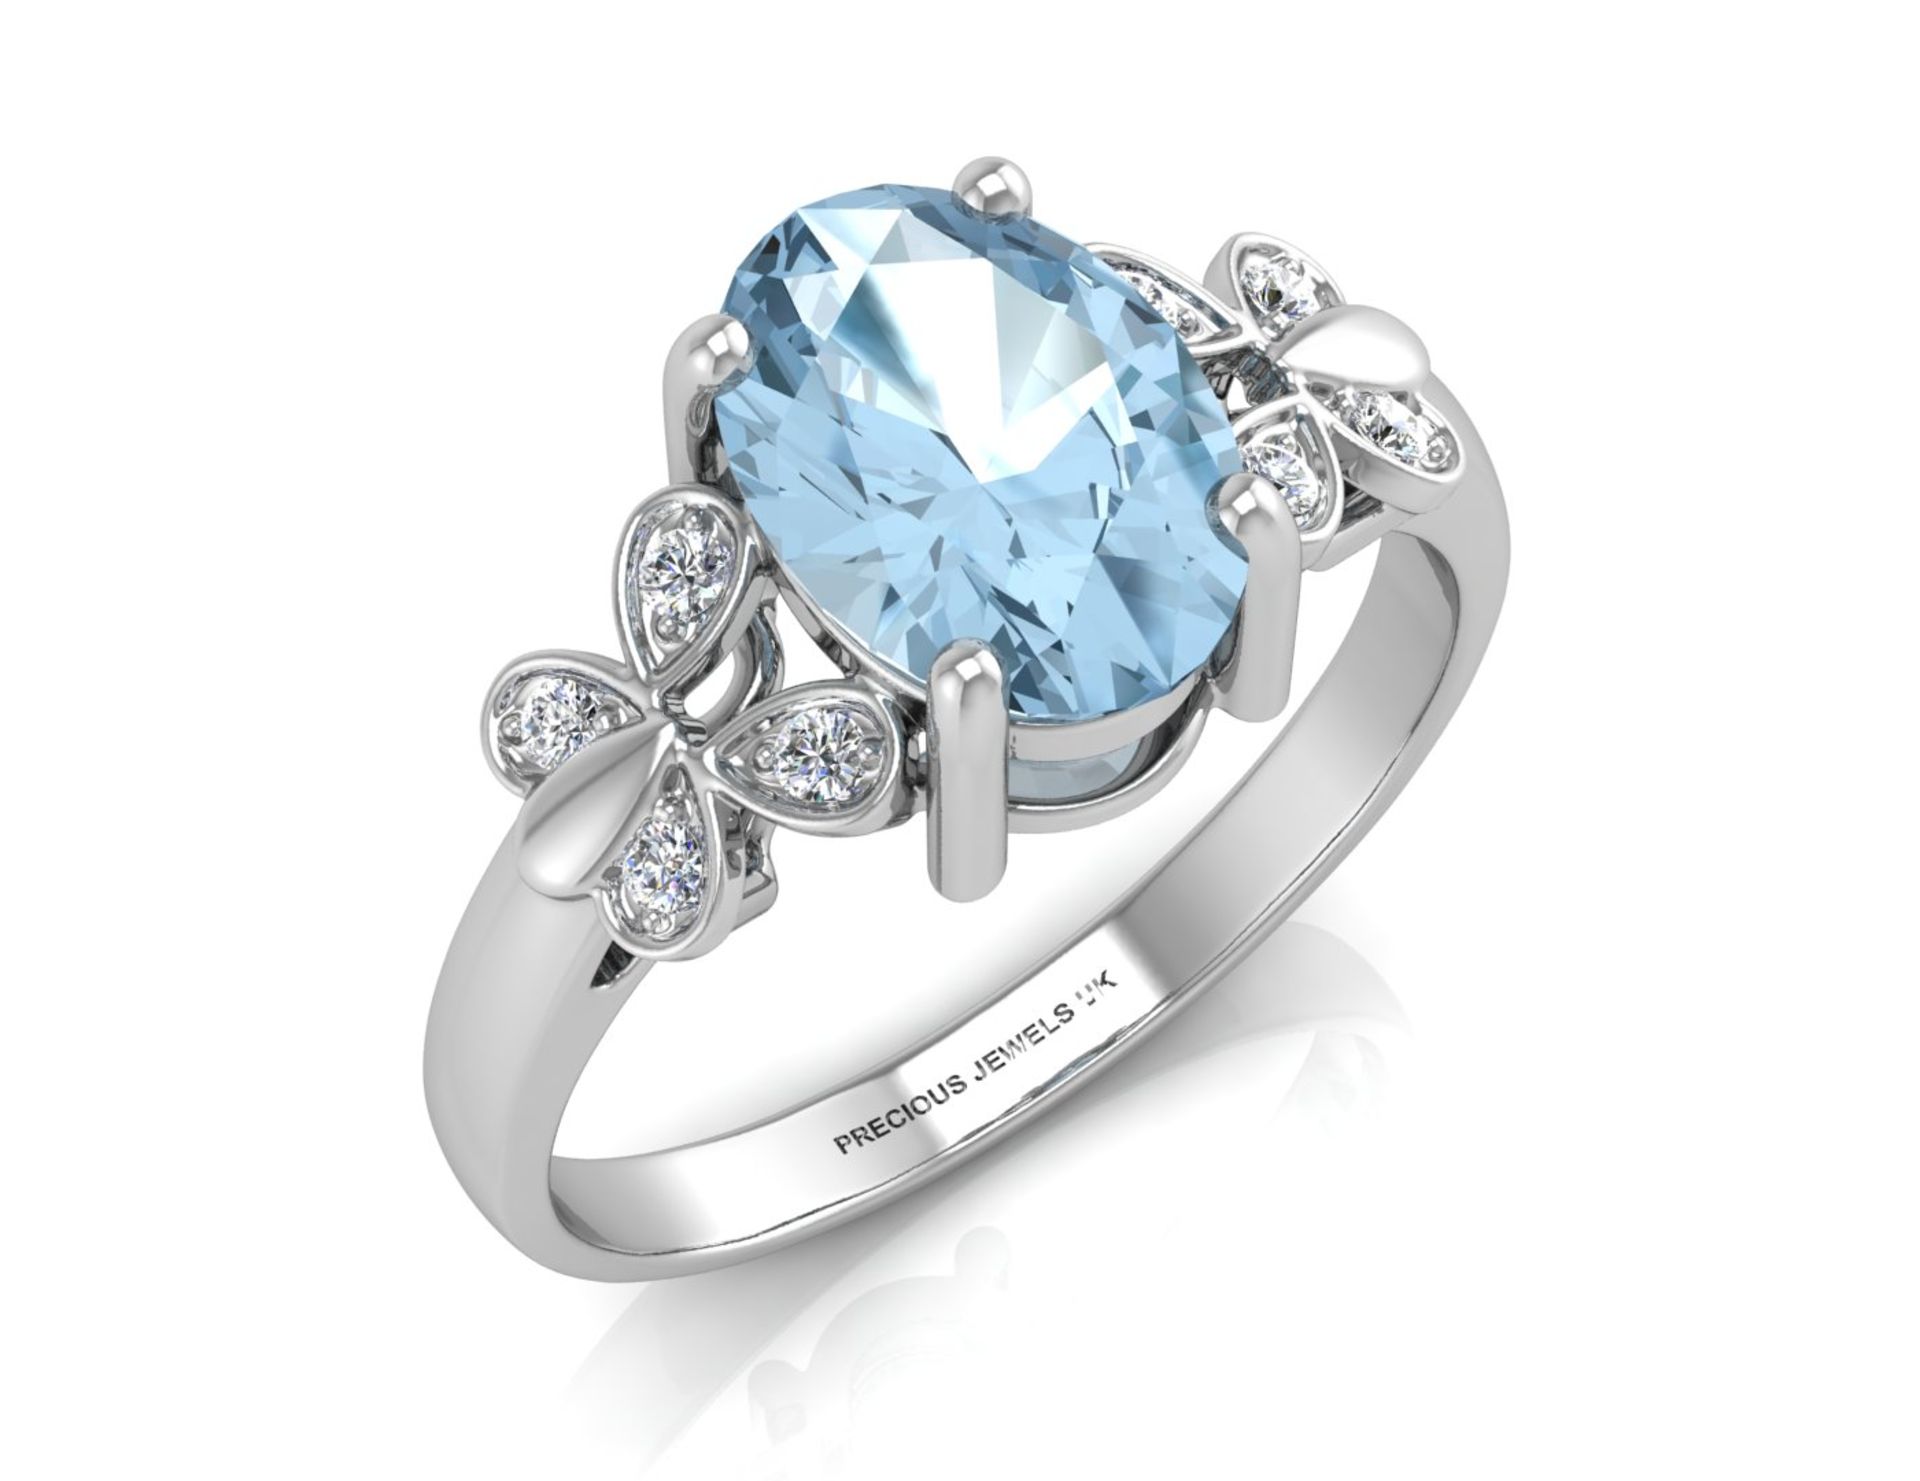 9ct White Gold Diamond And Blue Topaz Ring 0.03 Carats - Valued by GIE £2,295.00 - This huge 6.43